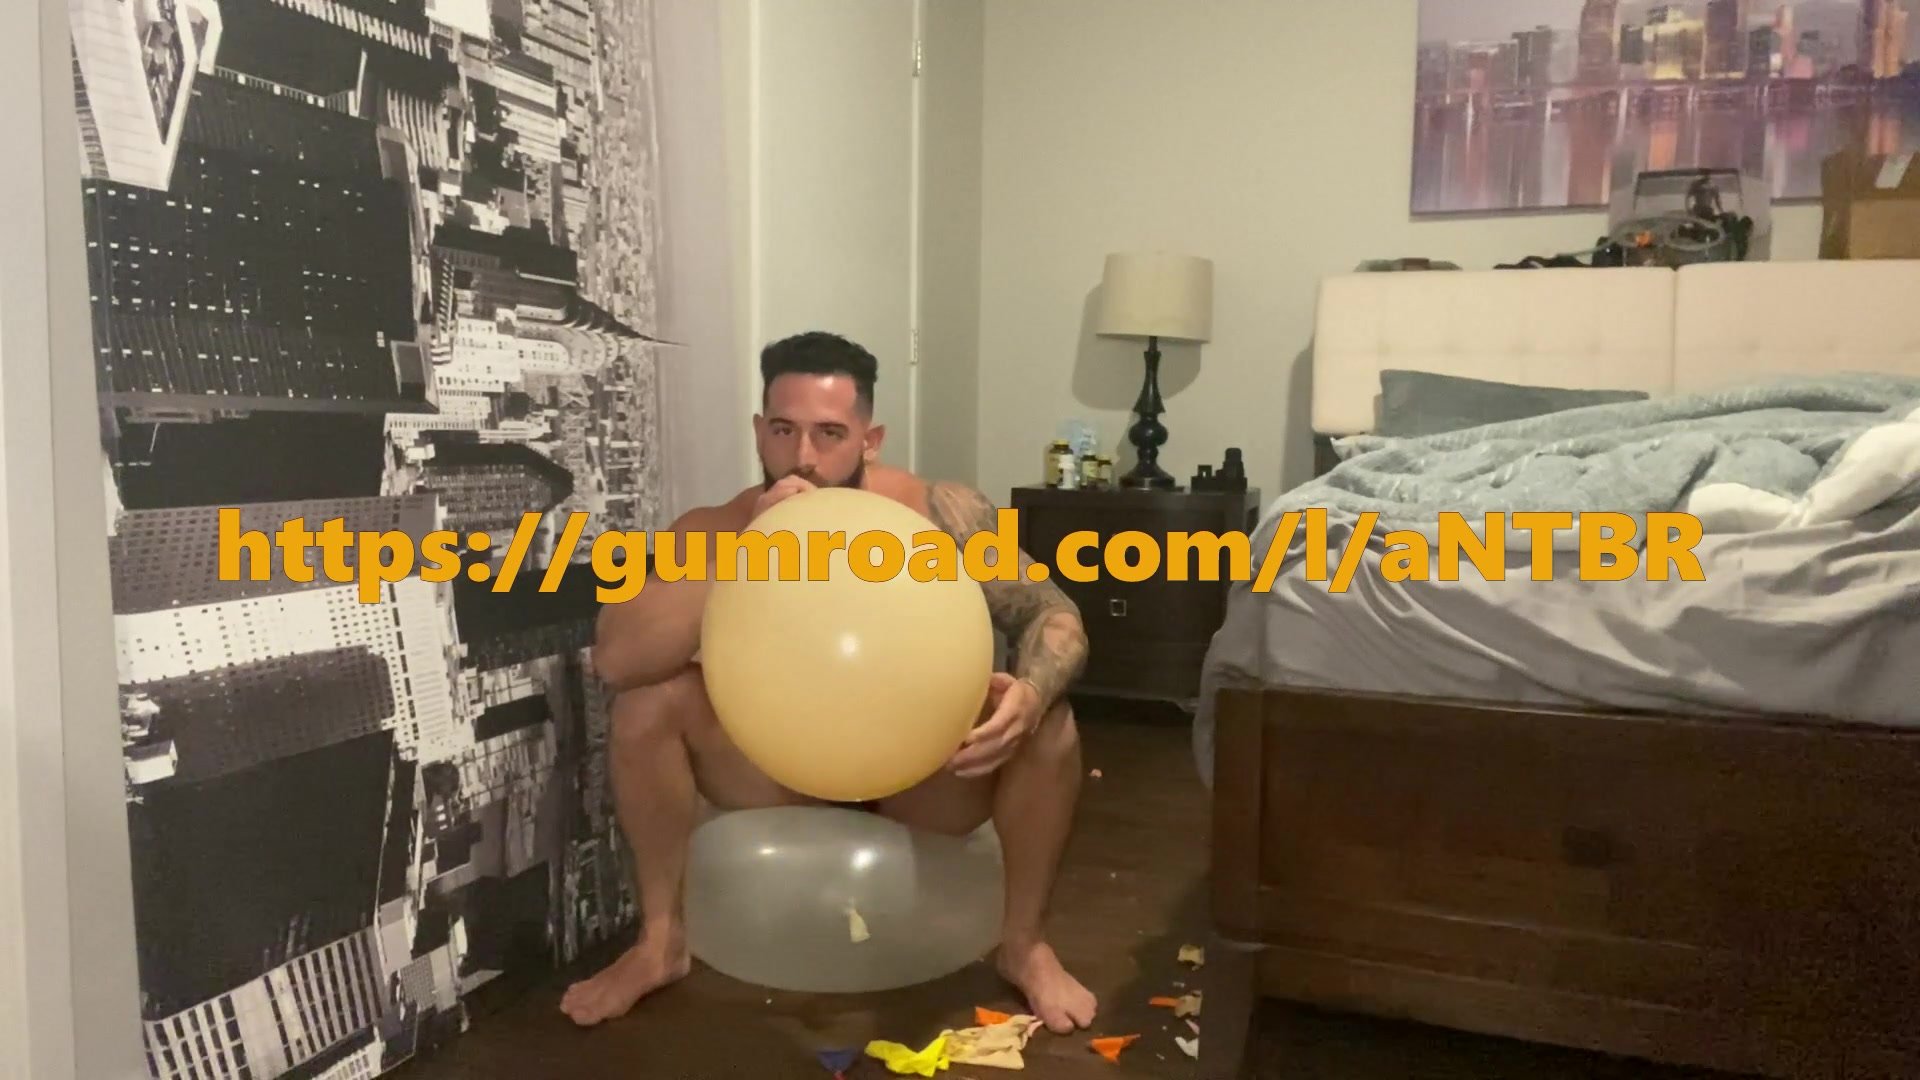 Preview: ...s is back for more balloon action